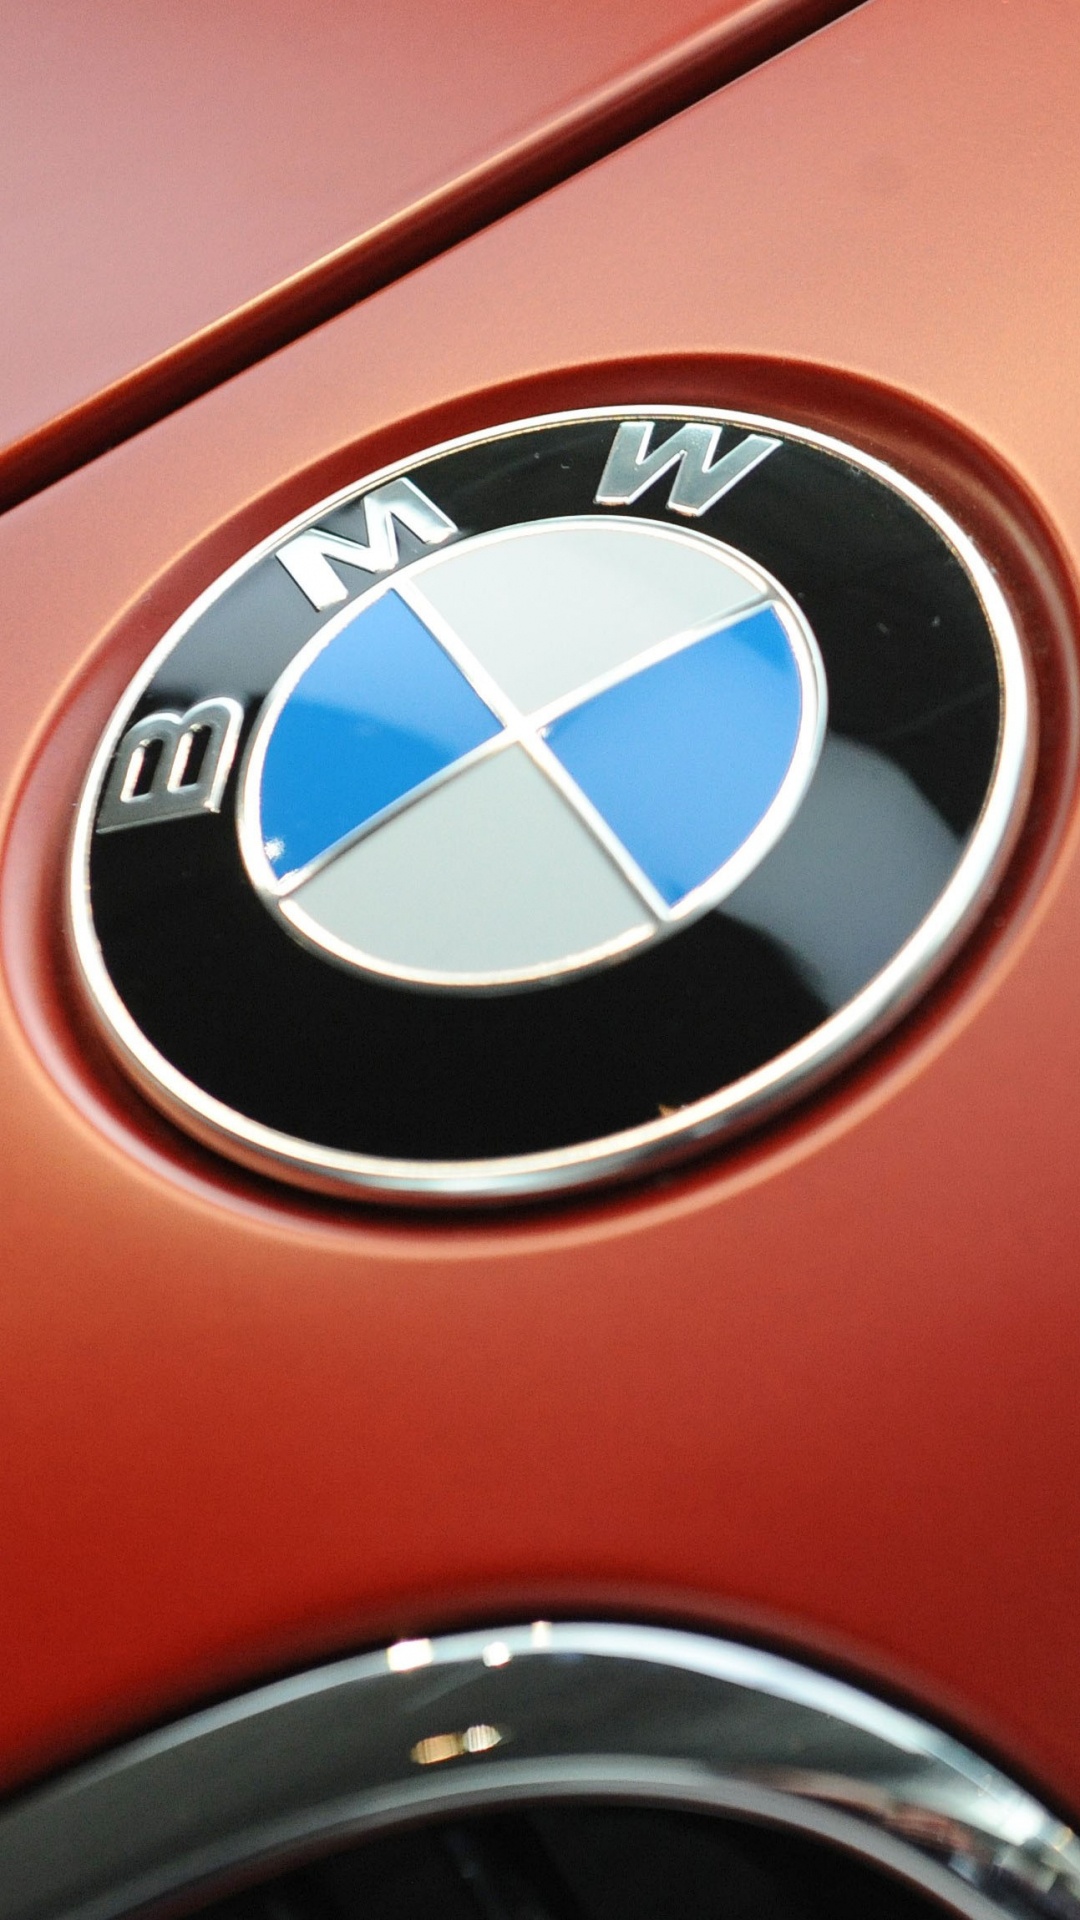 Red and Silver Bmw Car. Wallpaper in 1080x1920 Resolution